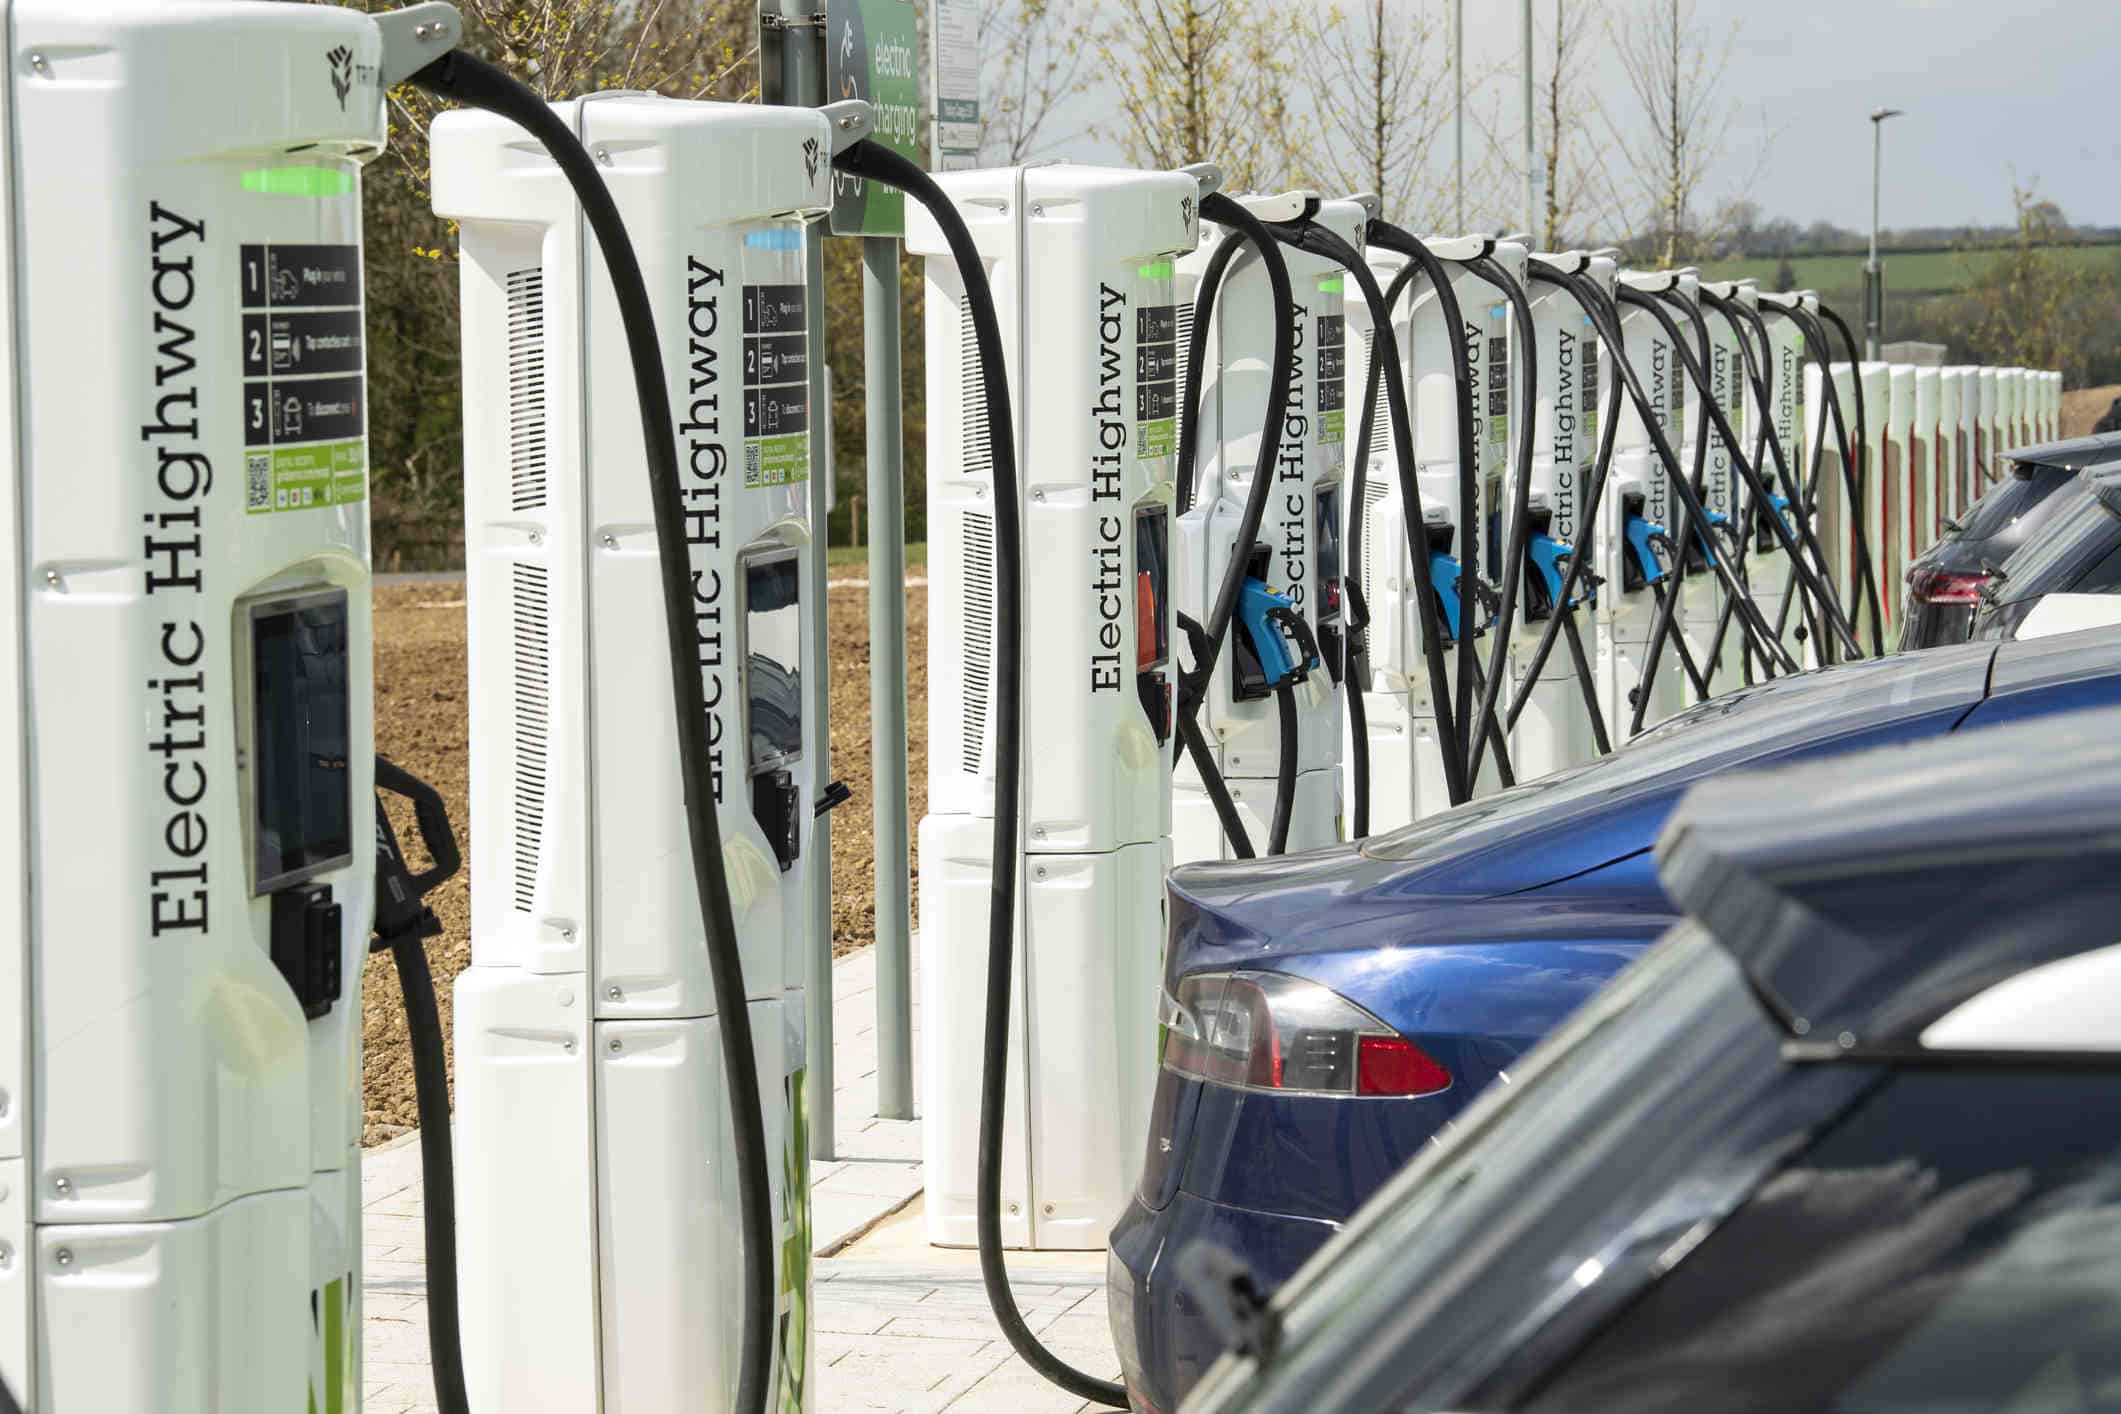 Row of electriv vehicle charging stations.